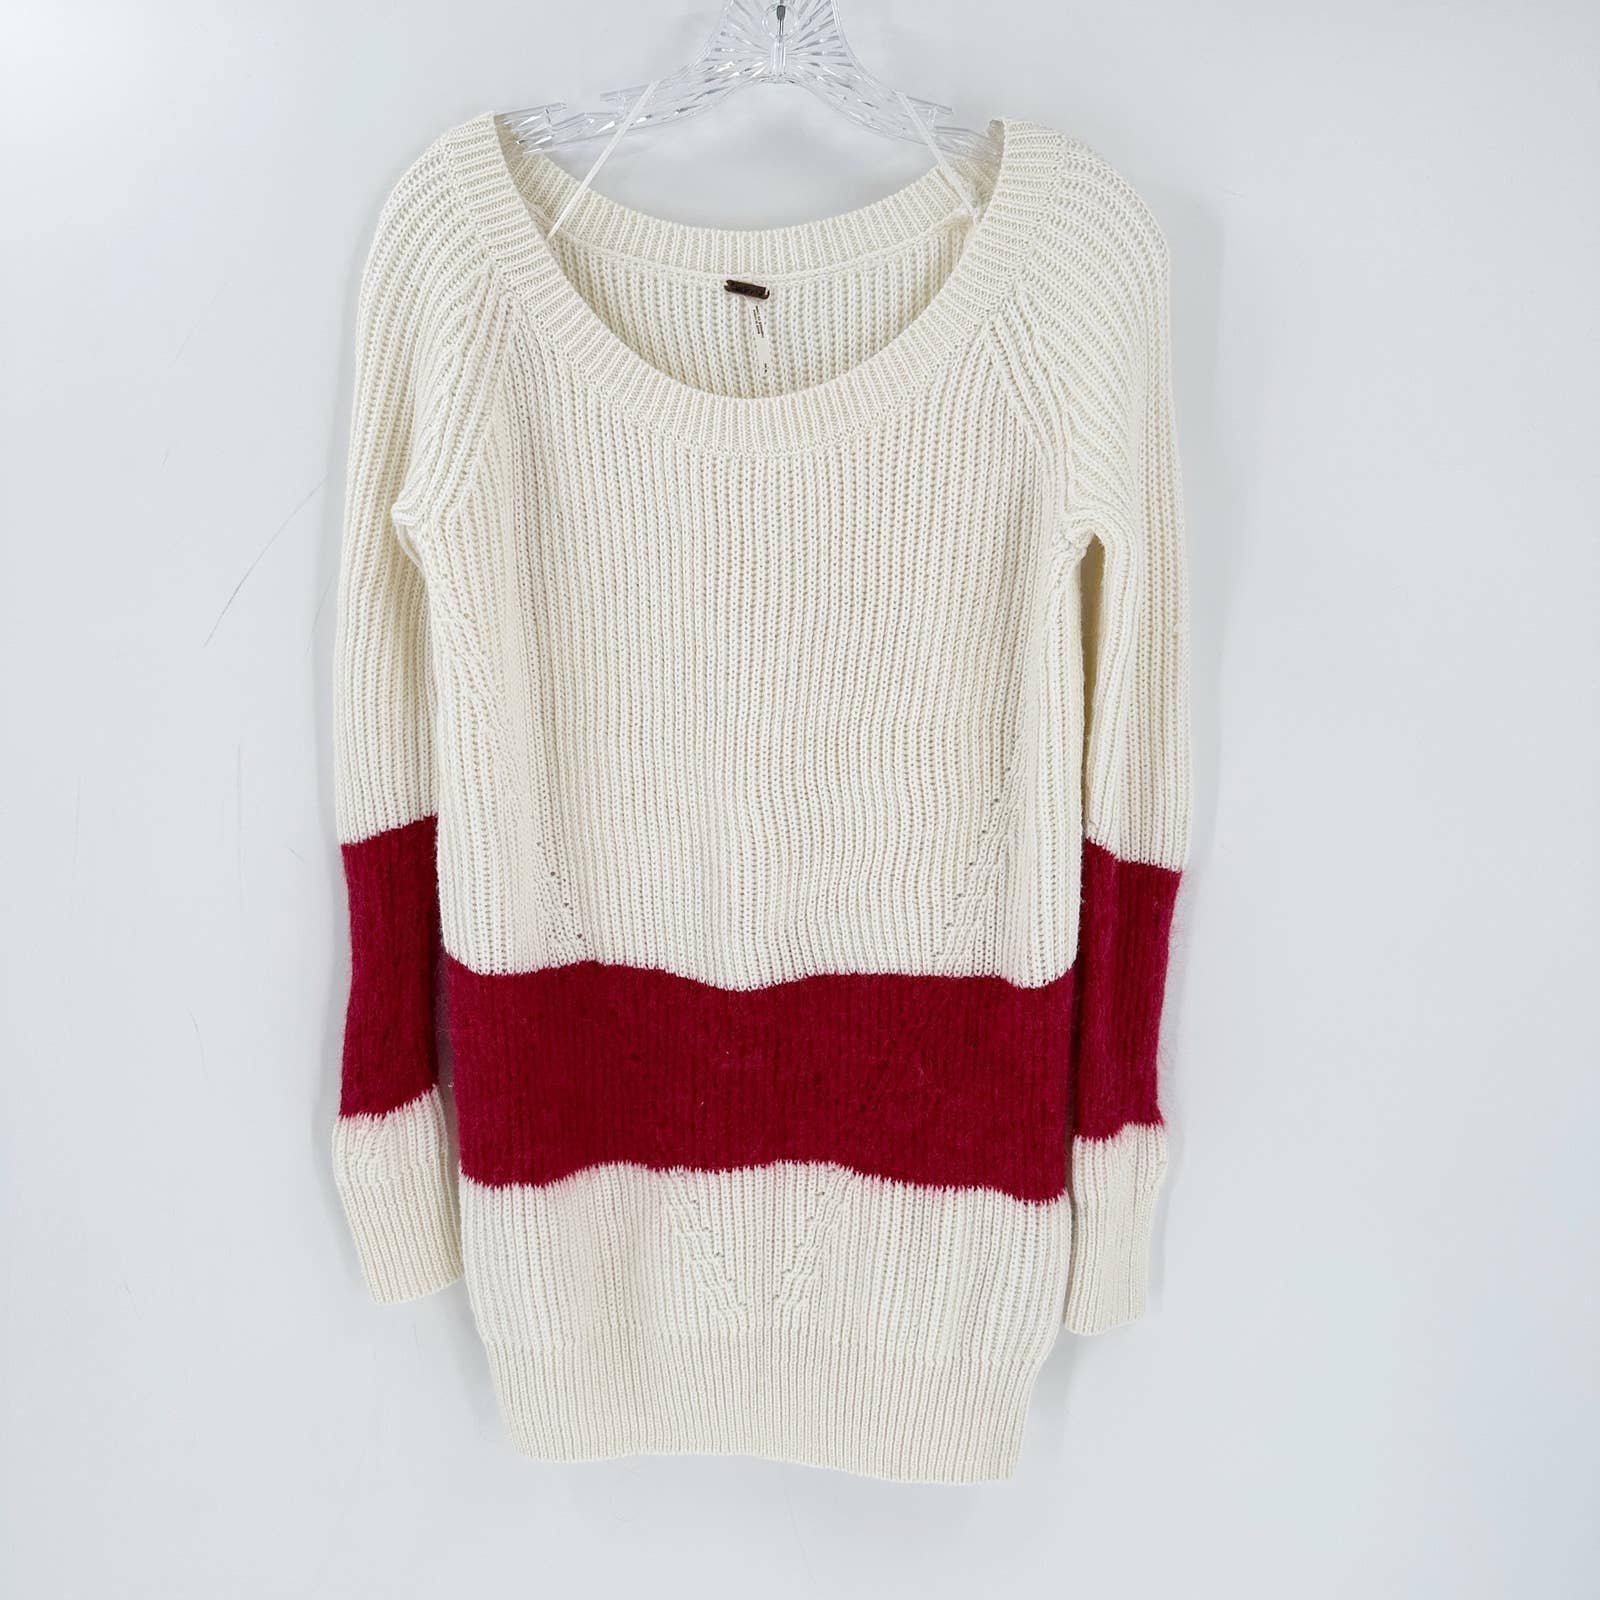 Simple Free People Cream Color Block Wool Blend Pullover Tunic Sweater Women´s Small gz5EBPLBe Novel 